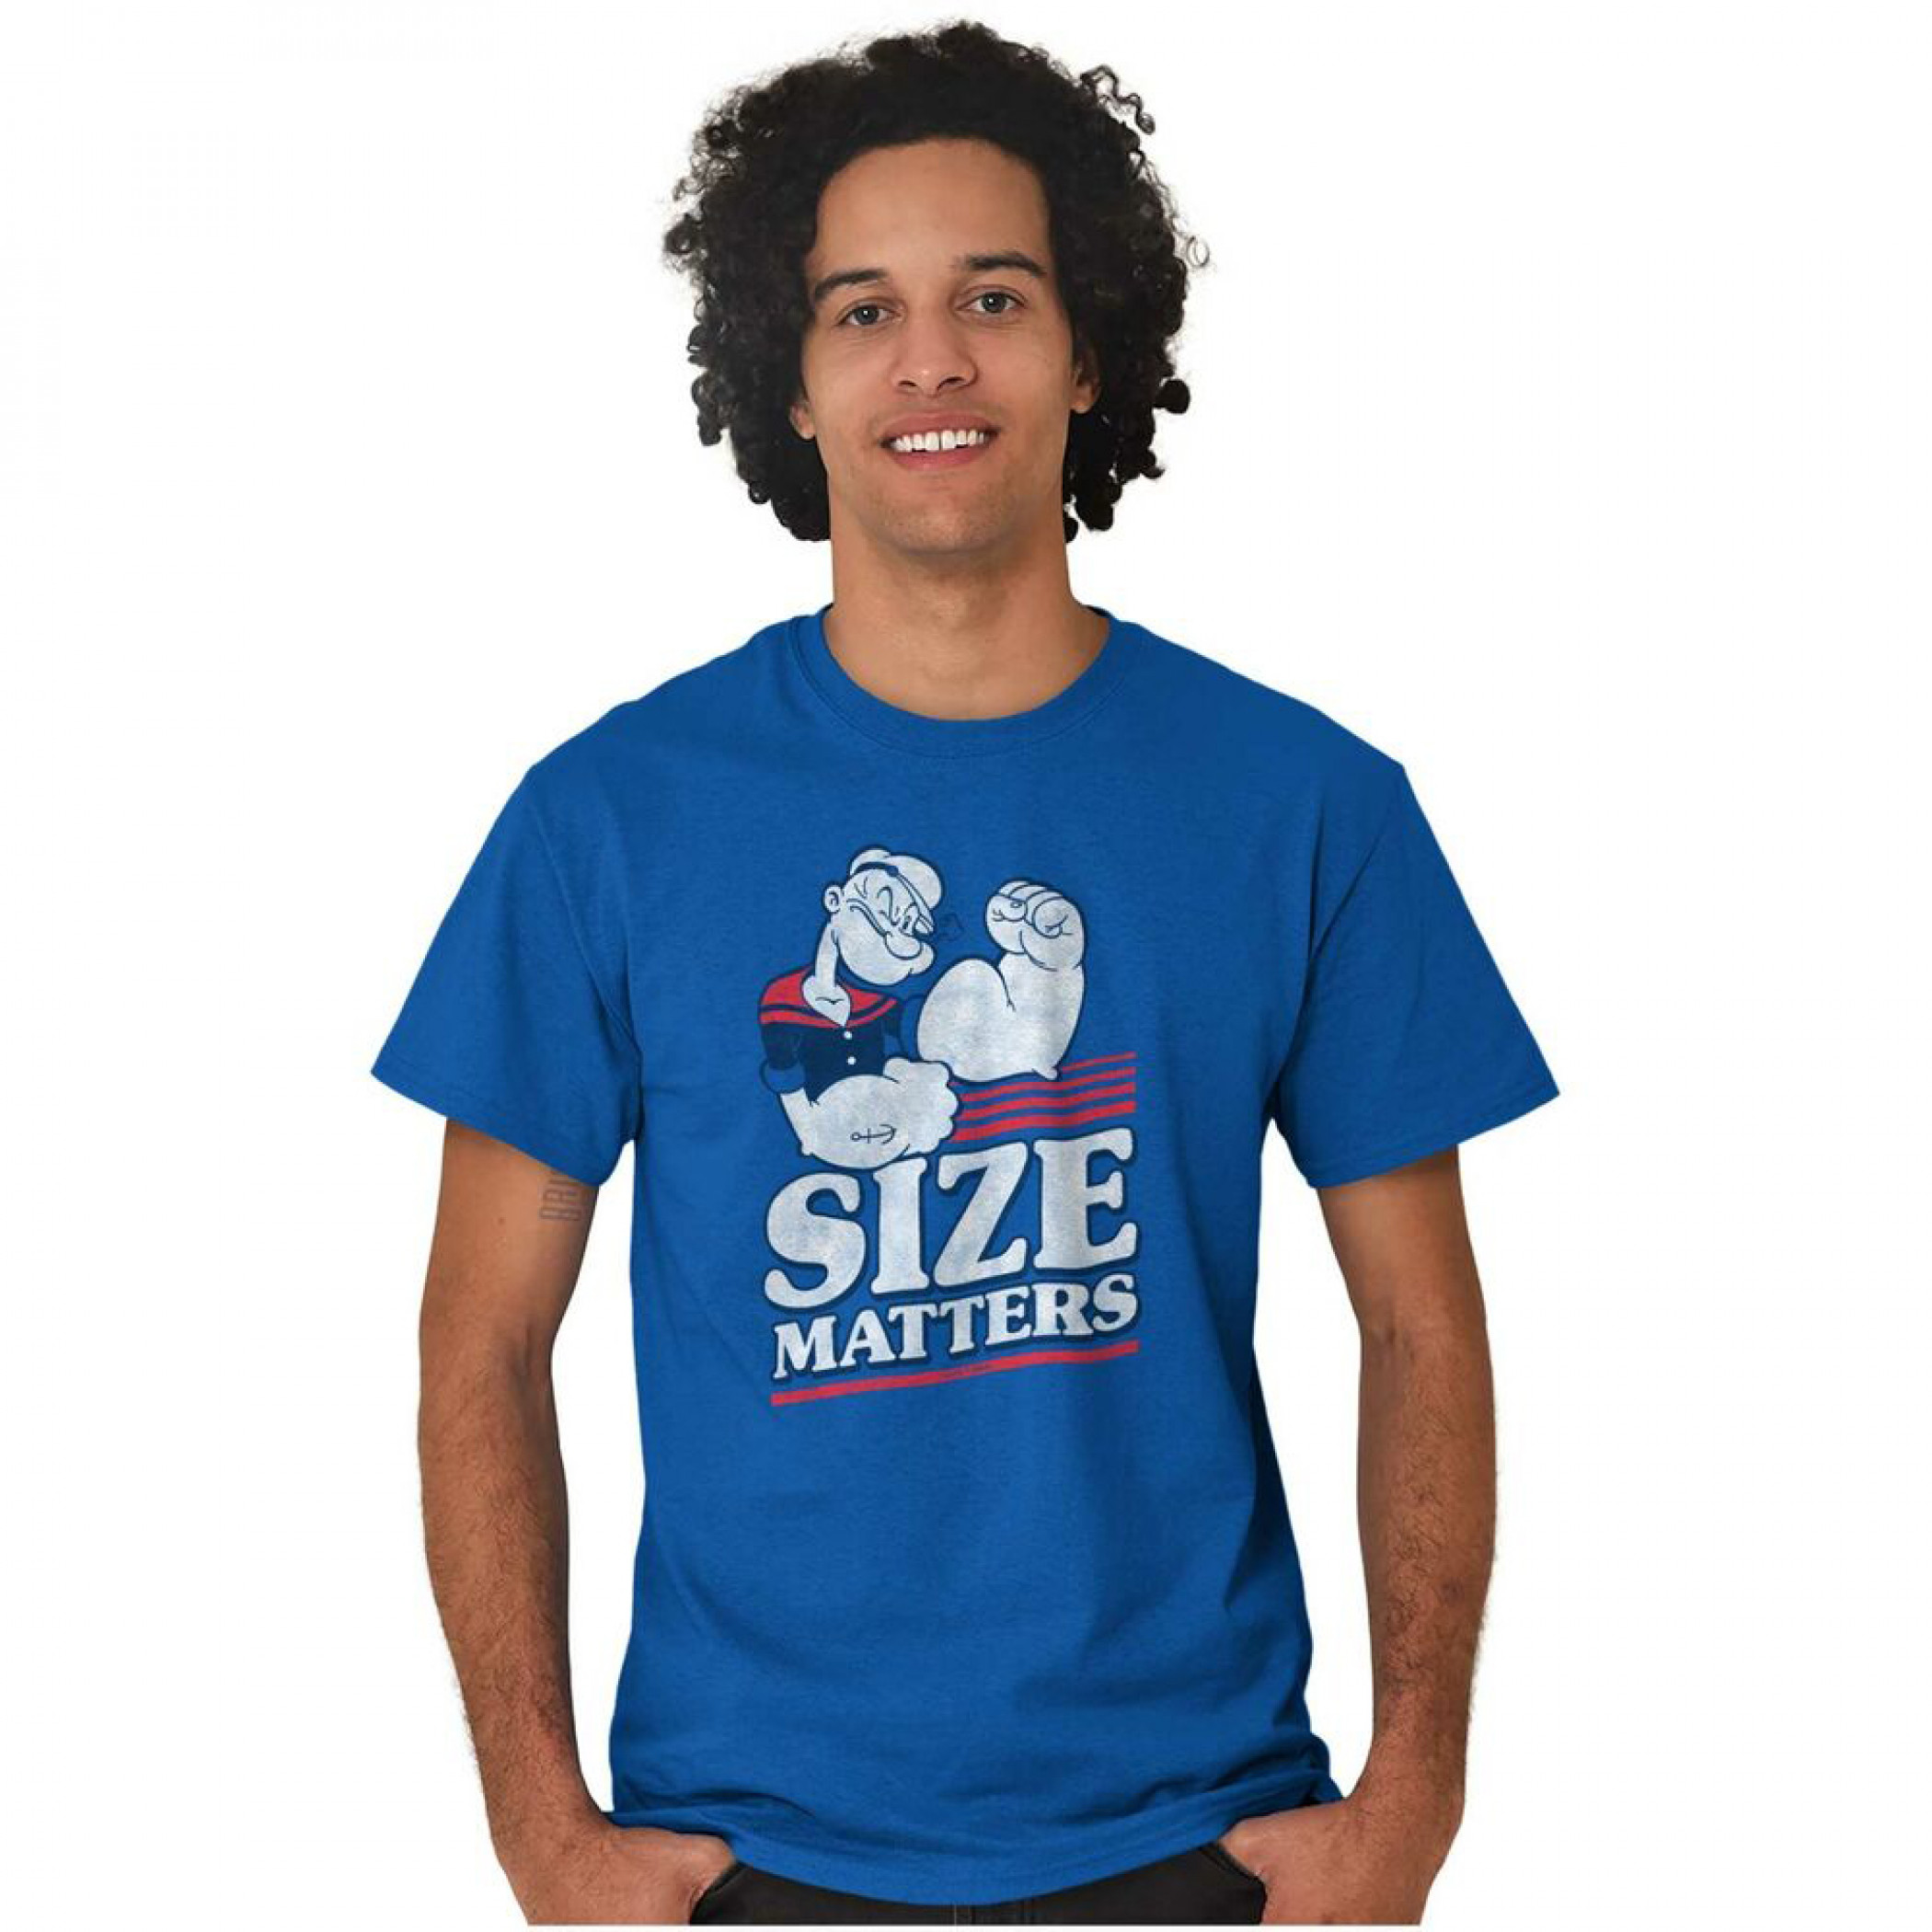 Popeye The Sailor Man Character Size Matters Bicep T-Shirt